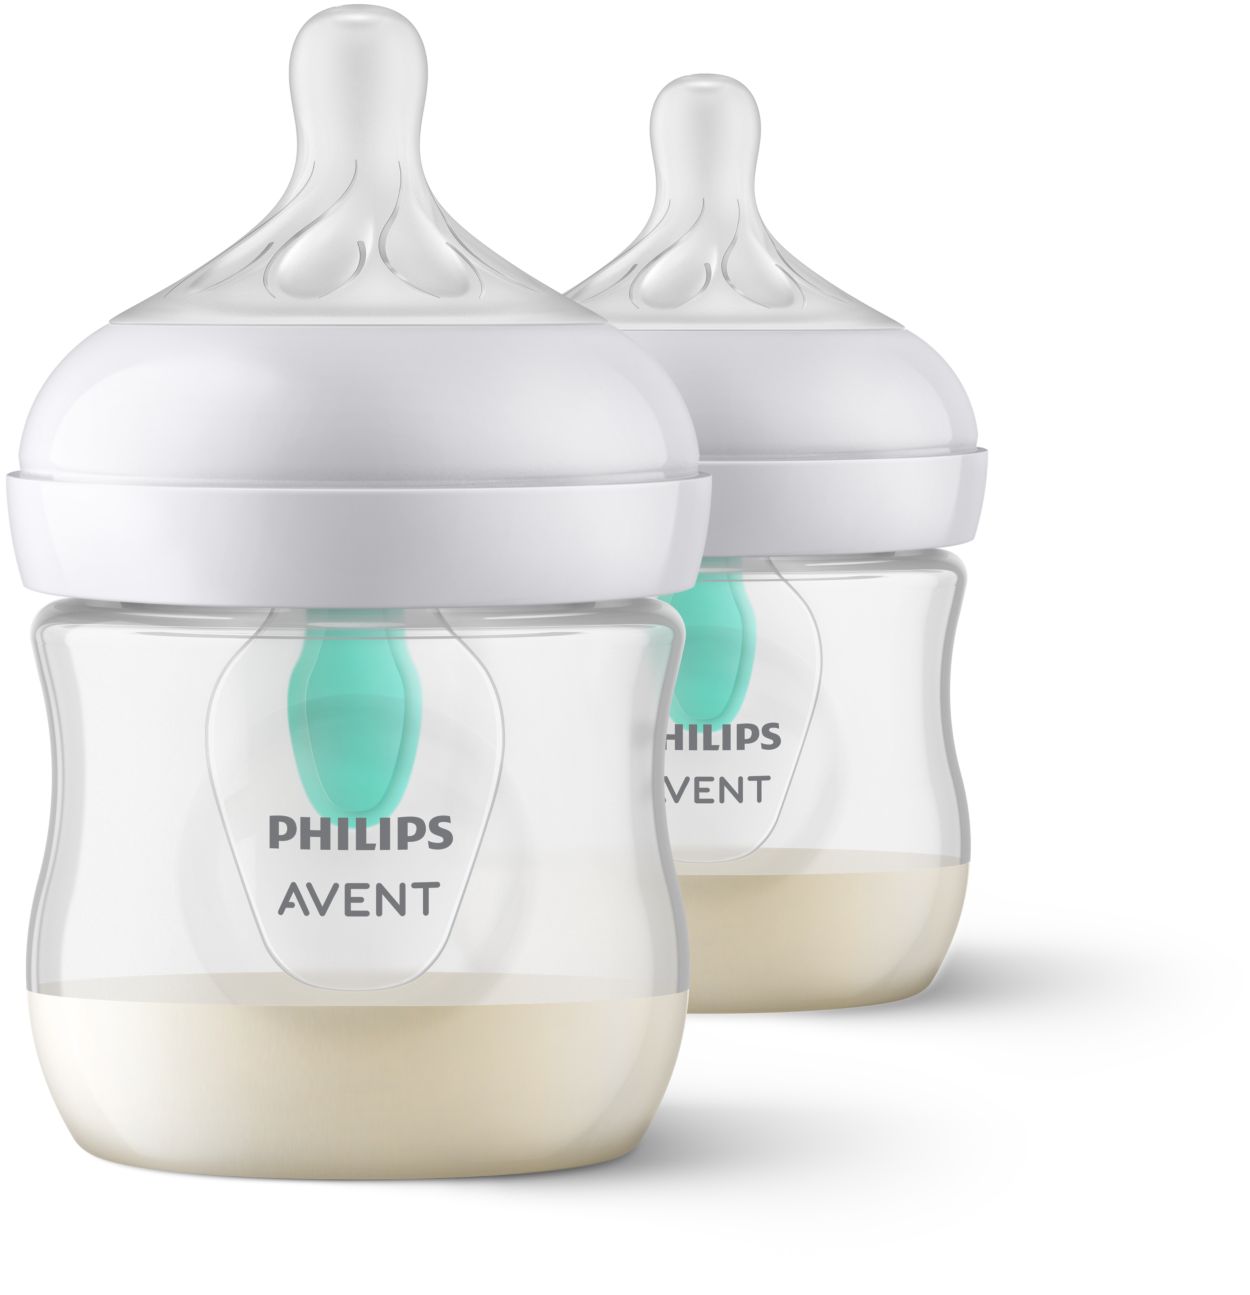 Natural Response Baby Bottle with Airfree vent SCY670/02